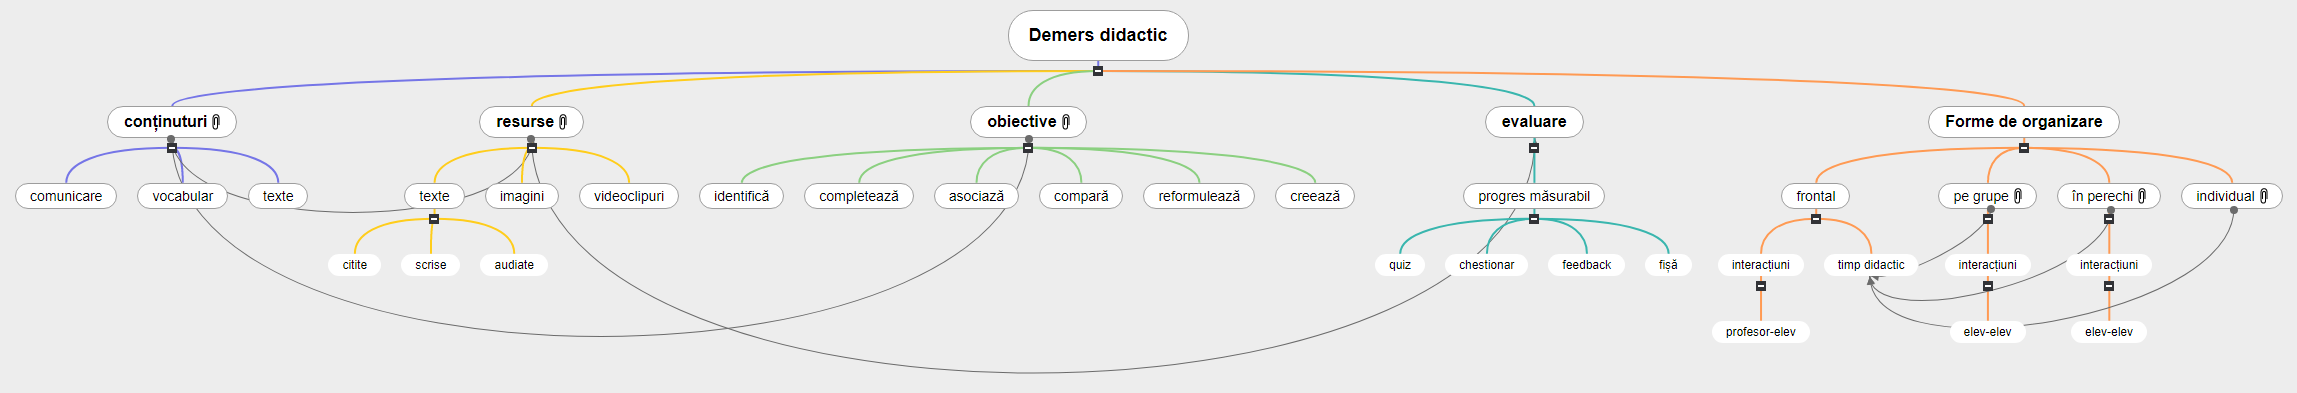 Demers didactic1 Mind Map